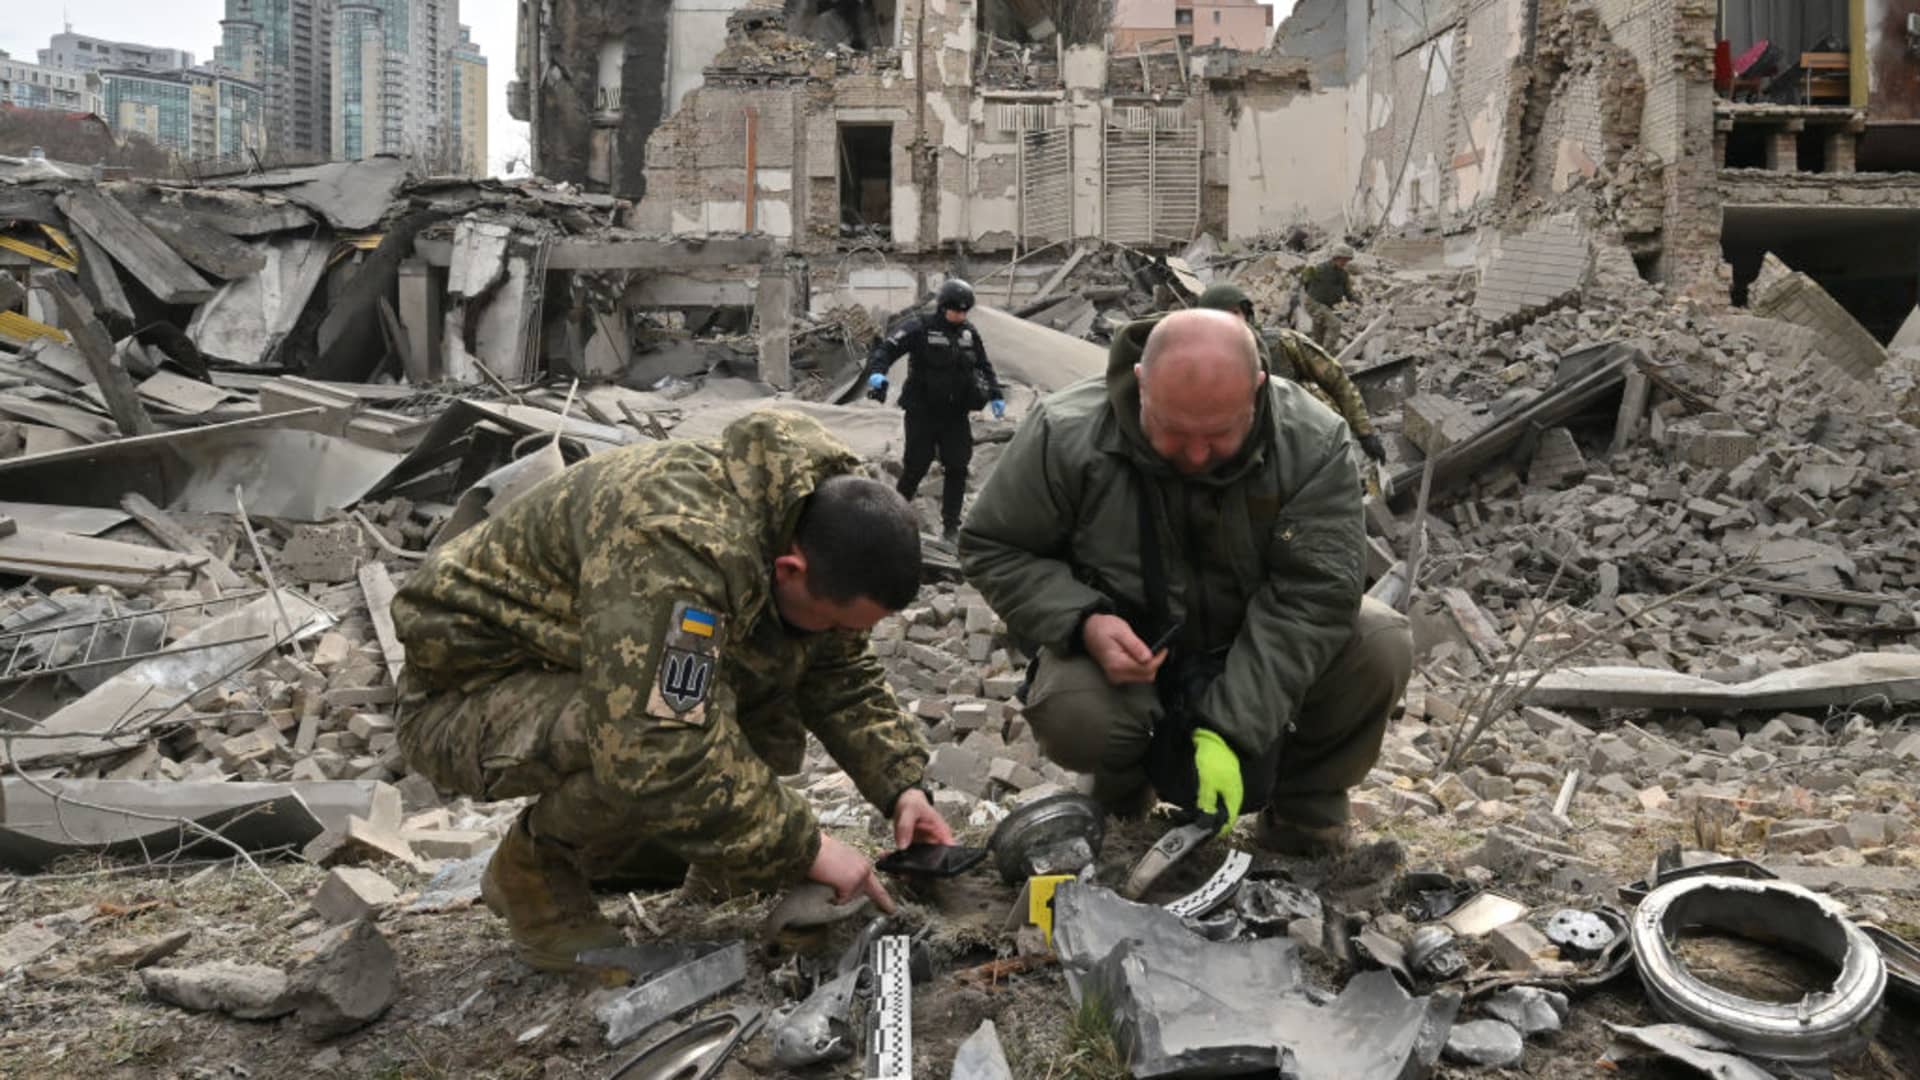 Ukrainian law enforcement officers examine fragments of a rocket at the site of a missile attack in Kyiv on March 25, 2024, amid the Russian invasion of Ukraine. Five people including a teenage girl were injured on March 25, 2024 during a Russian missile attack on Kyiv, where falling debris also damaged at least two buildings in central districts.